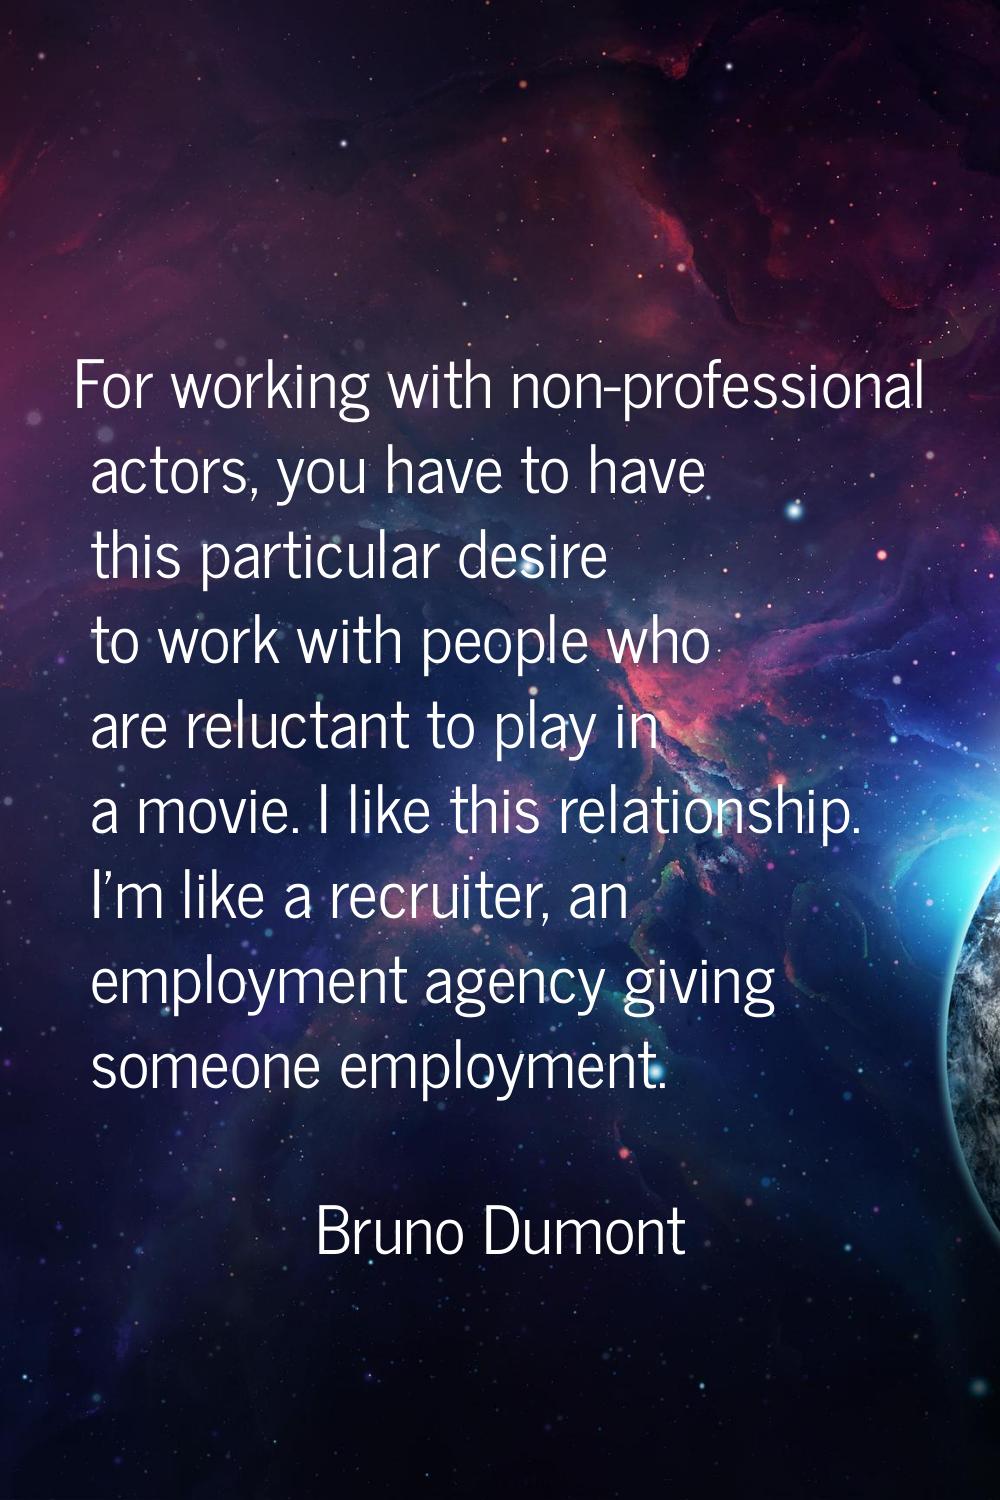 For working with non-professional actors, you have to have this particular desire to work with peop